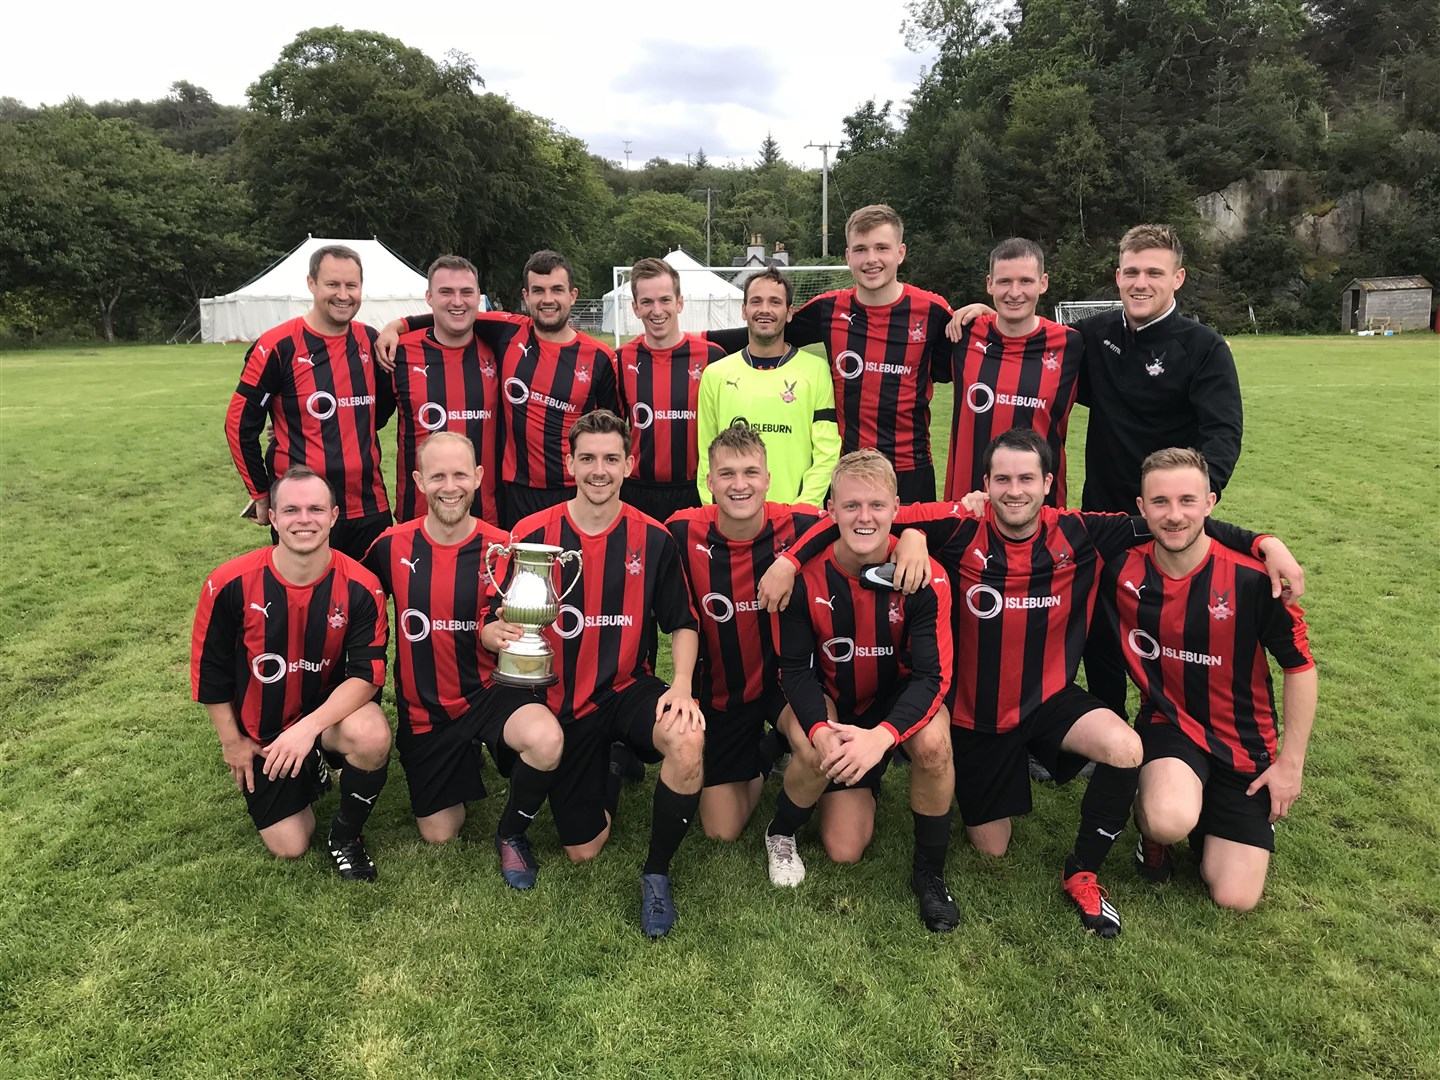 Tain Thistle won the North West Sutherland League